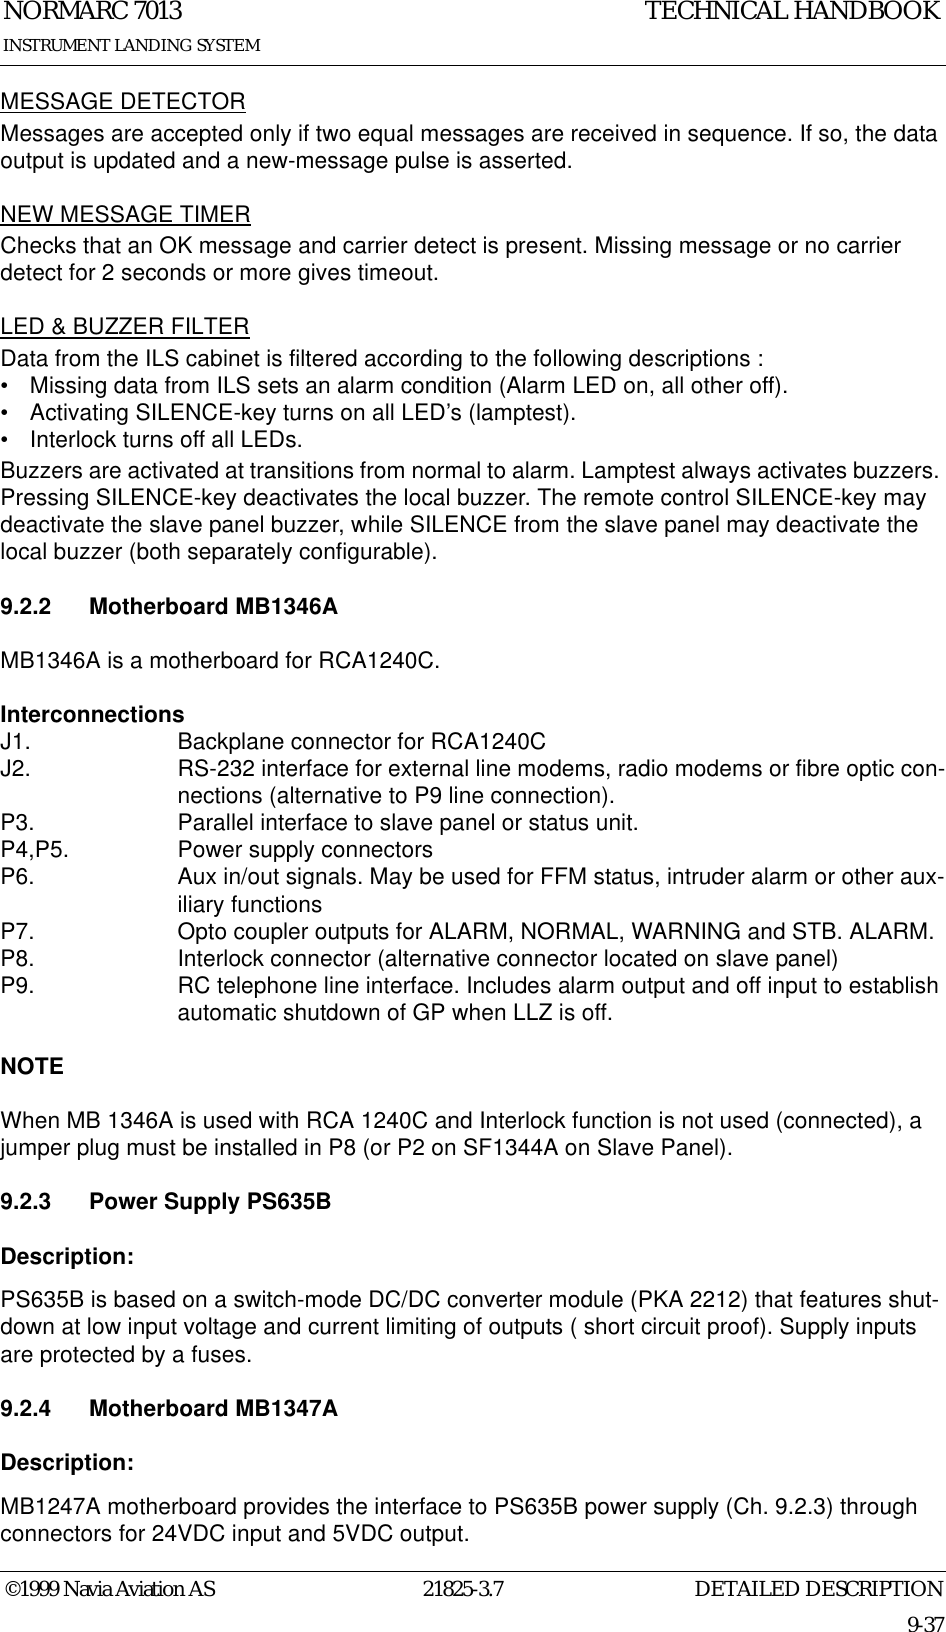 DETAILED DESCRIPTIONNORMARC 701321825-3.79-37INSTRUMENT LANDING SYSTEMTECHNICAL HANDBOOK©1999 Navia Aviation ASMESSAGE DETECTORMessages are accepted only if two equal messages are received in sequence. If so, the data output is updated and a new-message pulse is asserted.NEW MESSAGE TIMERChecks that an OK message and carrier detect is present. Missing message or no carrier detect for 2 seconds or more gives timeout.LED &amp; BUZZER FILTERData from the ILS cabinet is filtered according to the following descriptions :• Missing data from ILS sets an alarm condition (Alarm LED on, all other off).• Activating SILENCE-key turns on all LED’s (lamptest).• Interlock turns off all LEDs.Buzzers are activated at transitions from normal to alarm. Lamptest always activates buzzers. Pressing SILENCE-key deactivates the local buzzer. The remote control SILENCE-key may deactivate the slave panel buzzer, while SILENCE from the slave panel may deactivate the local buzzer (both separately configurable).9.2.2 Motherboard MB1346A MB1346A is a motherboard for RCA1240C. InterconnectionsJ1.  Backplane connector for RCA1240CJ2.  RS-232 interface for external line modems, radio modems or fibre optic con-nections (alternative to P9 line connection).P3.  Parallel interface to slave panel or status unit.P4,P5. Power supply connectorsP6.  Aux in/out signals. May be used for FFM status, intruder alarm or other aux-iliary functionsP7.  Opto coupler outputs for ALARM, NORMAL, WARNING and STB. ALARM.P8.  Interlock connector (alternative connector located on slave panel) P9.  RC telephone line interface. Includes alarm output and off input to establish automatic shutdown of GP when LLZ is off.NOTEWhen MB 1346A is used with RCA 1240C and Interlock function is not used (connected), a jumper plug must be installed in P8 (or P2 on SF1344A on Slave Panel).9.2.3 Power Supply PS635BDescription:PS635B is based on a switch-mode DC/DC converter module (PKA 2212) that features shut-down at low input voltage and current limiting of outputs ( short circuit proof). Supply inputs are protected by a fuses.9.2.4 Motherboard MB1347ADescription:MB1247A motherboard provides the interface to PS635B power supply (Ch. 9.2.3) through connectors for 24VDC input and 5VDC output.